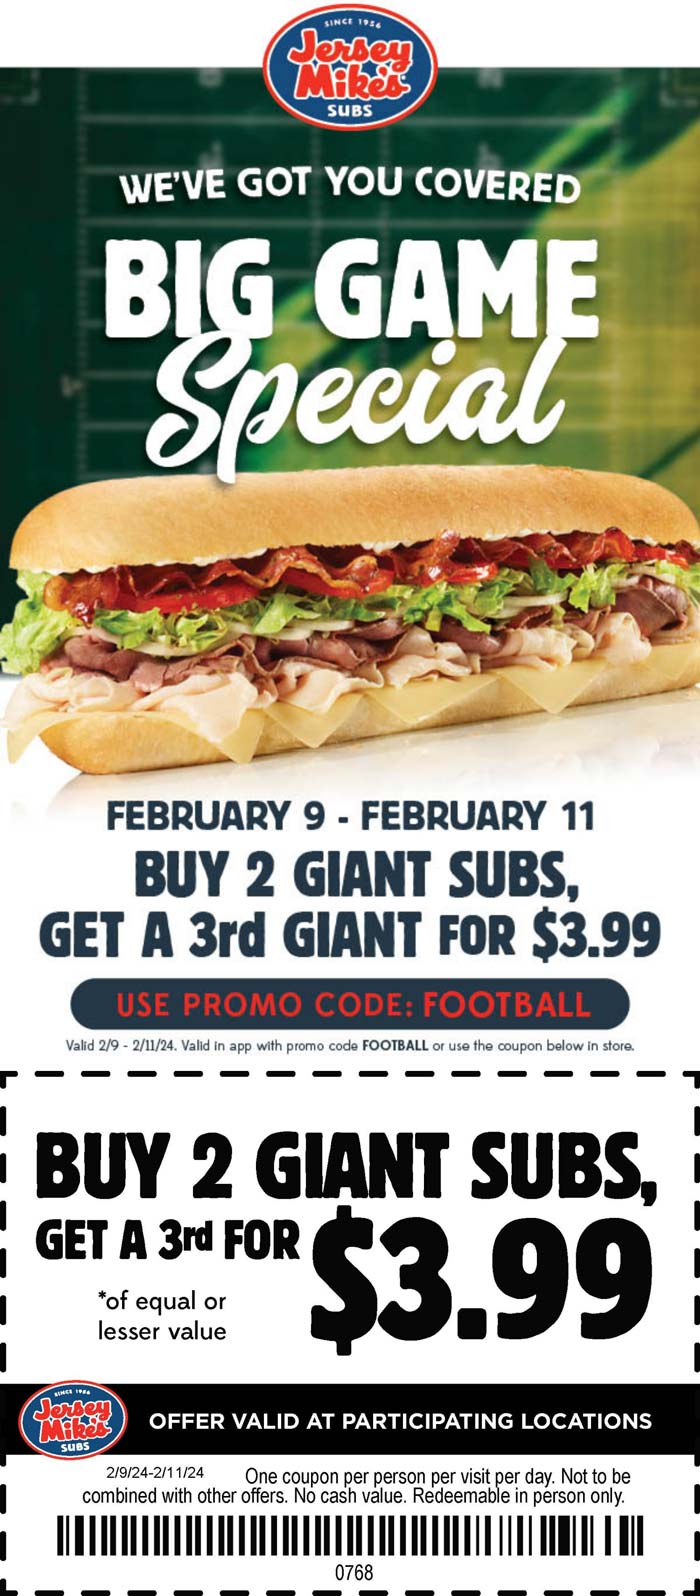 Jersey Mikes restaurants Coupon  3rd giant sub sandwich $4 at Jersey Mikes #jerseymikes 